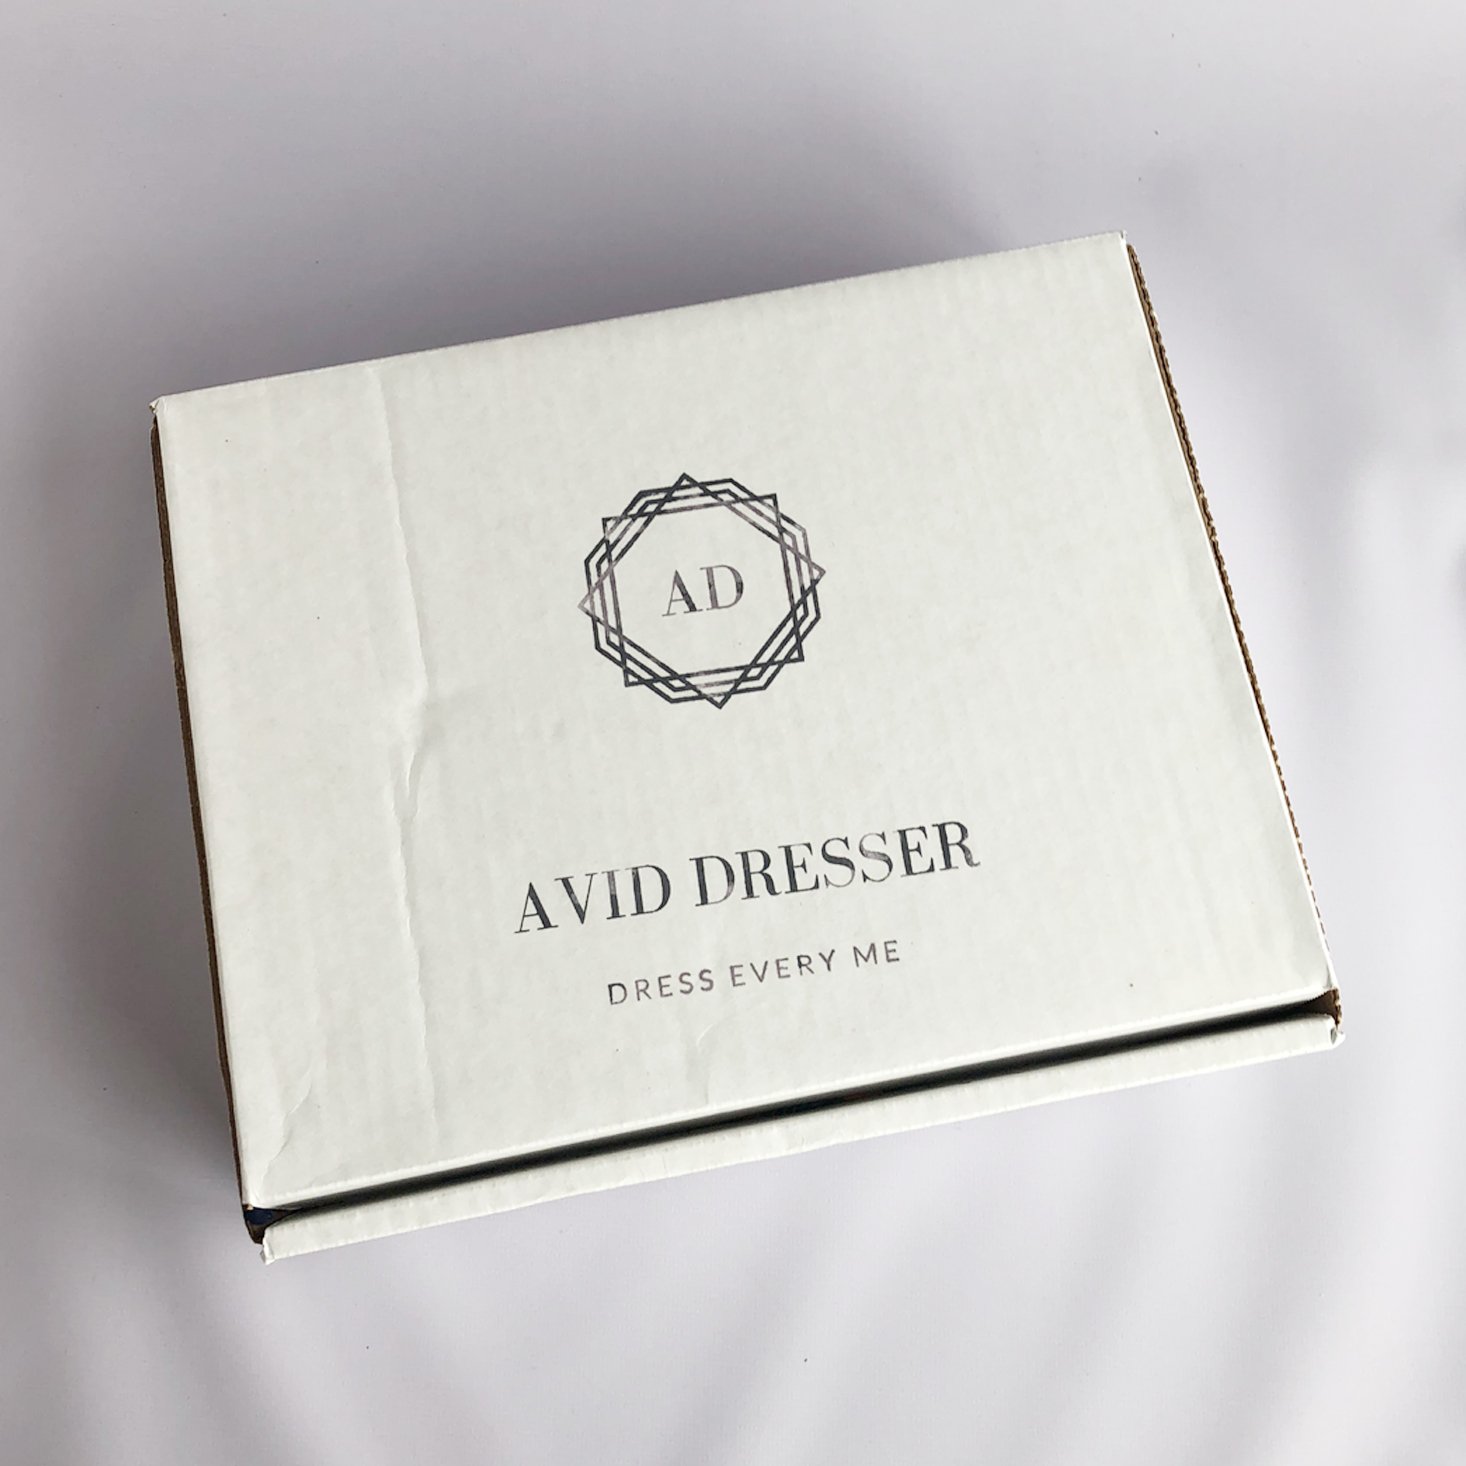 Avid Dresser Clothing Box Review + Coupon – February 2018